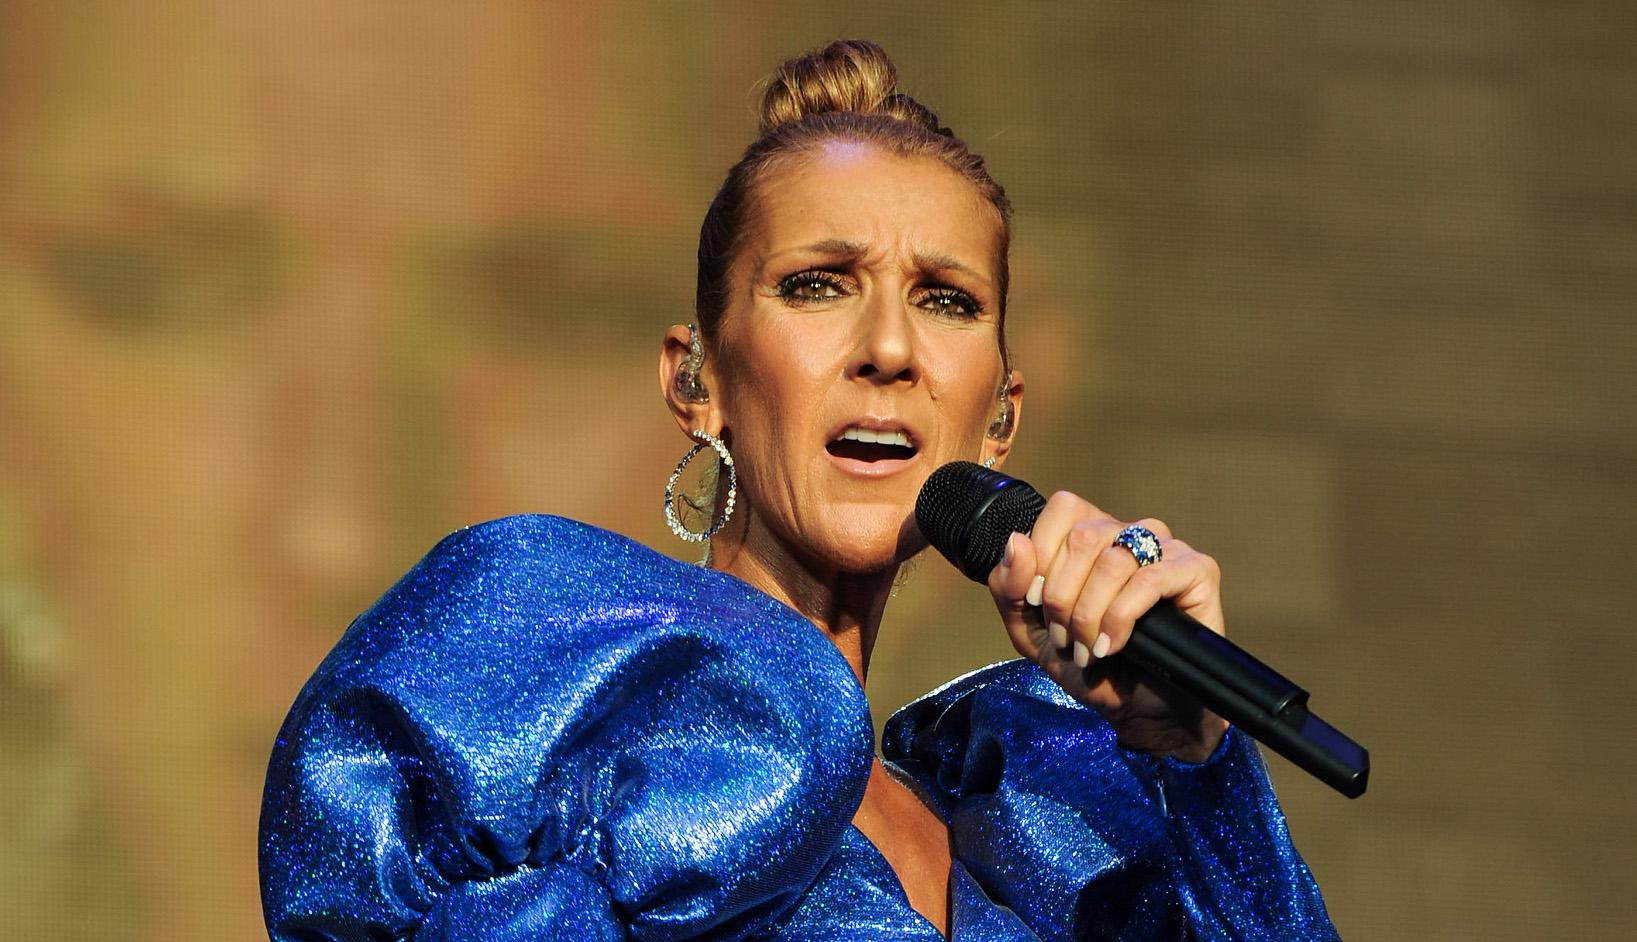 Did Celine Dion Die in a Plane Crash? Or Is It All Just a Hoax?